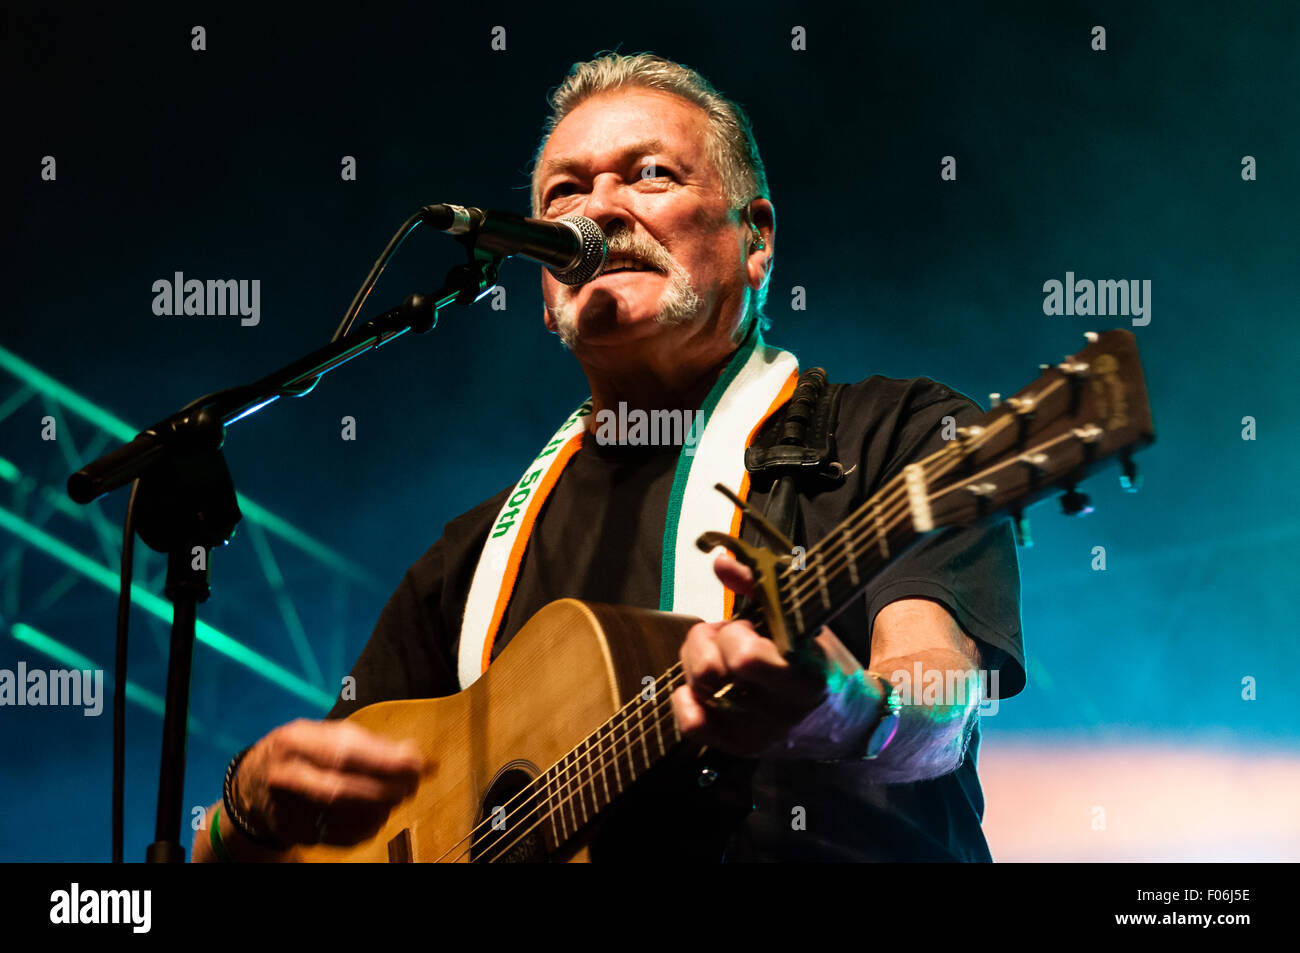 Belfast, Northern Ireland. 8 Aug 2015 - Tommy Byrne from the Irish ...